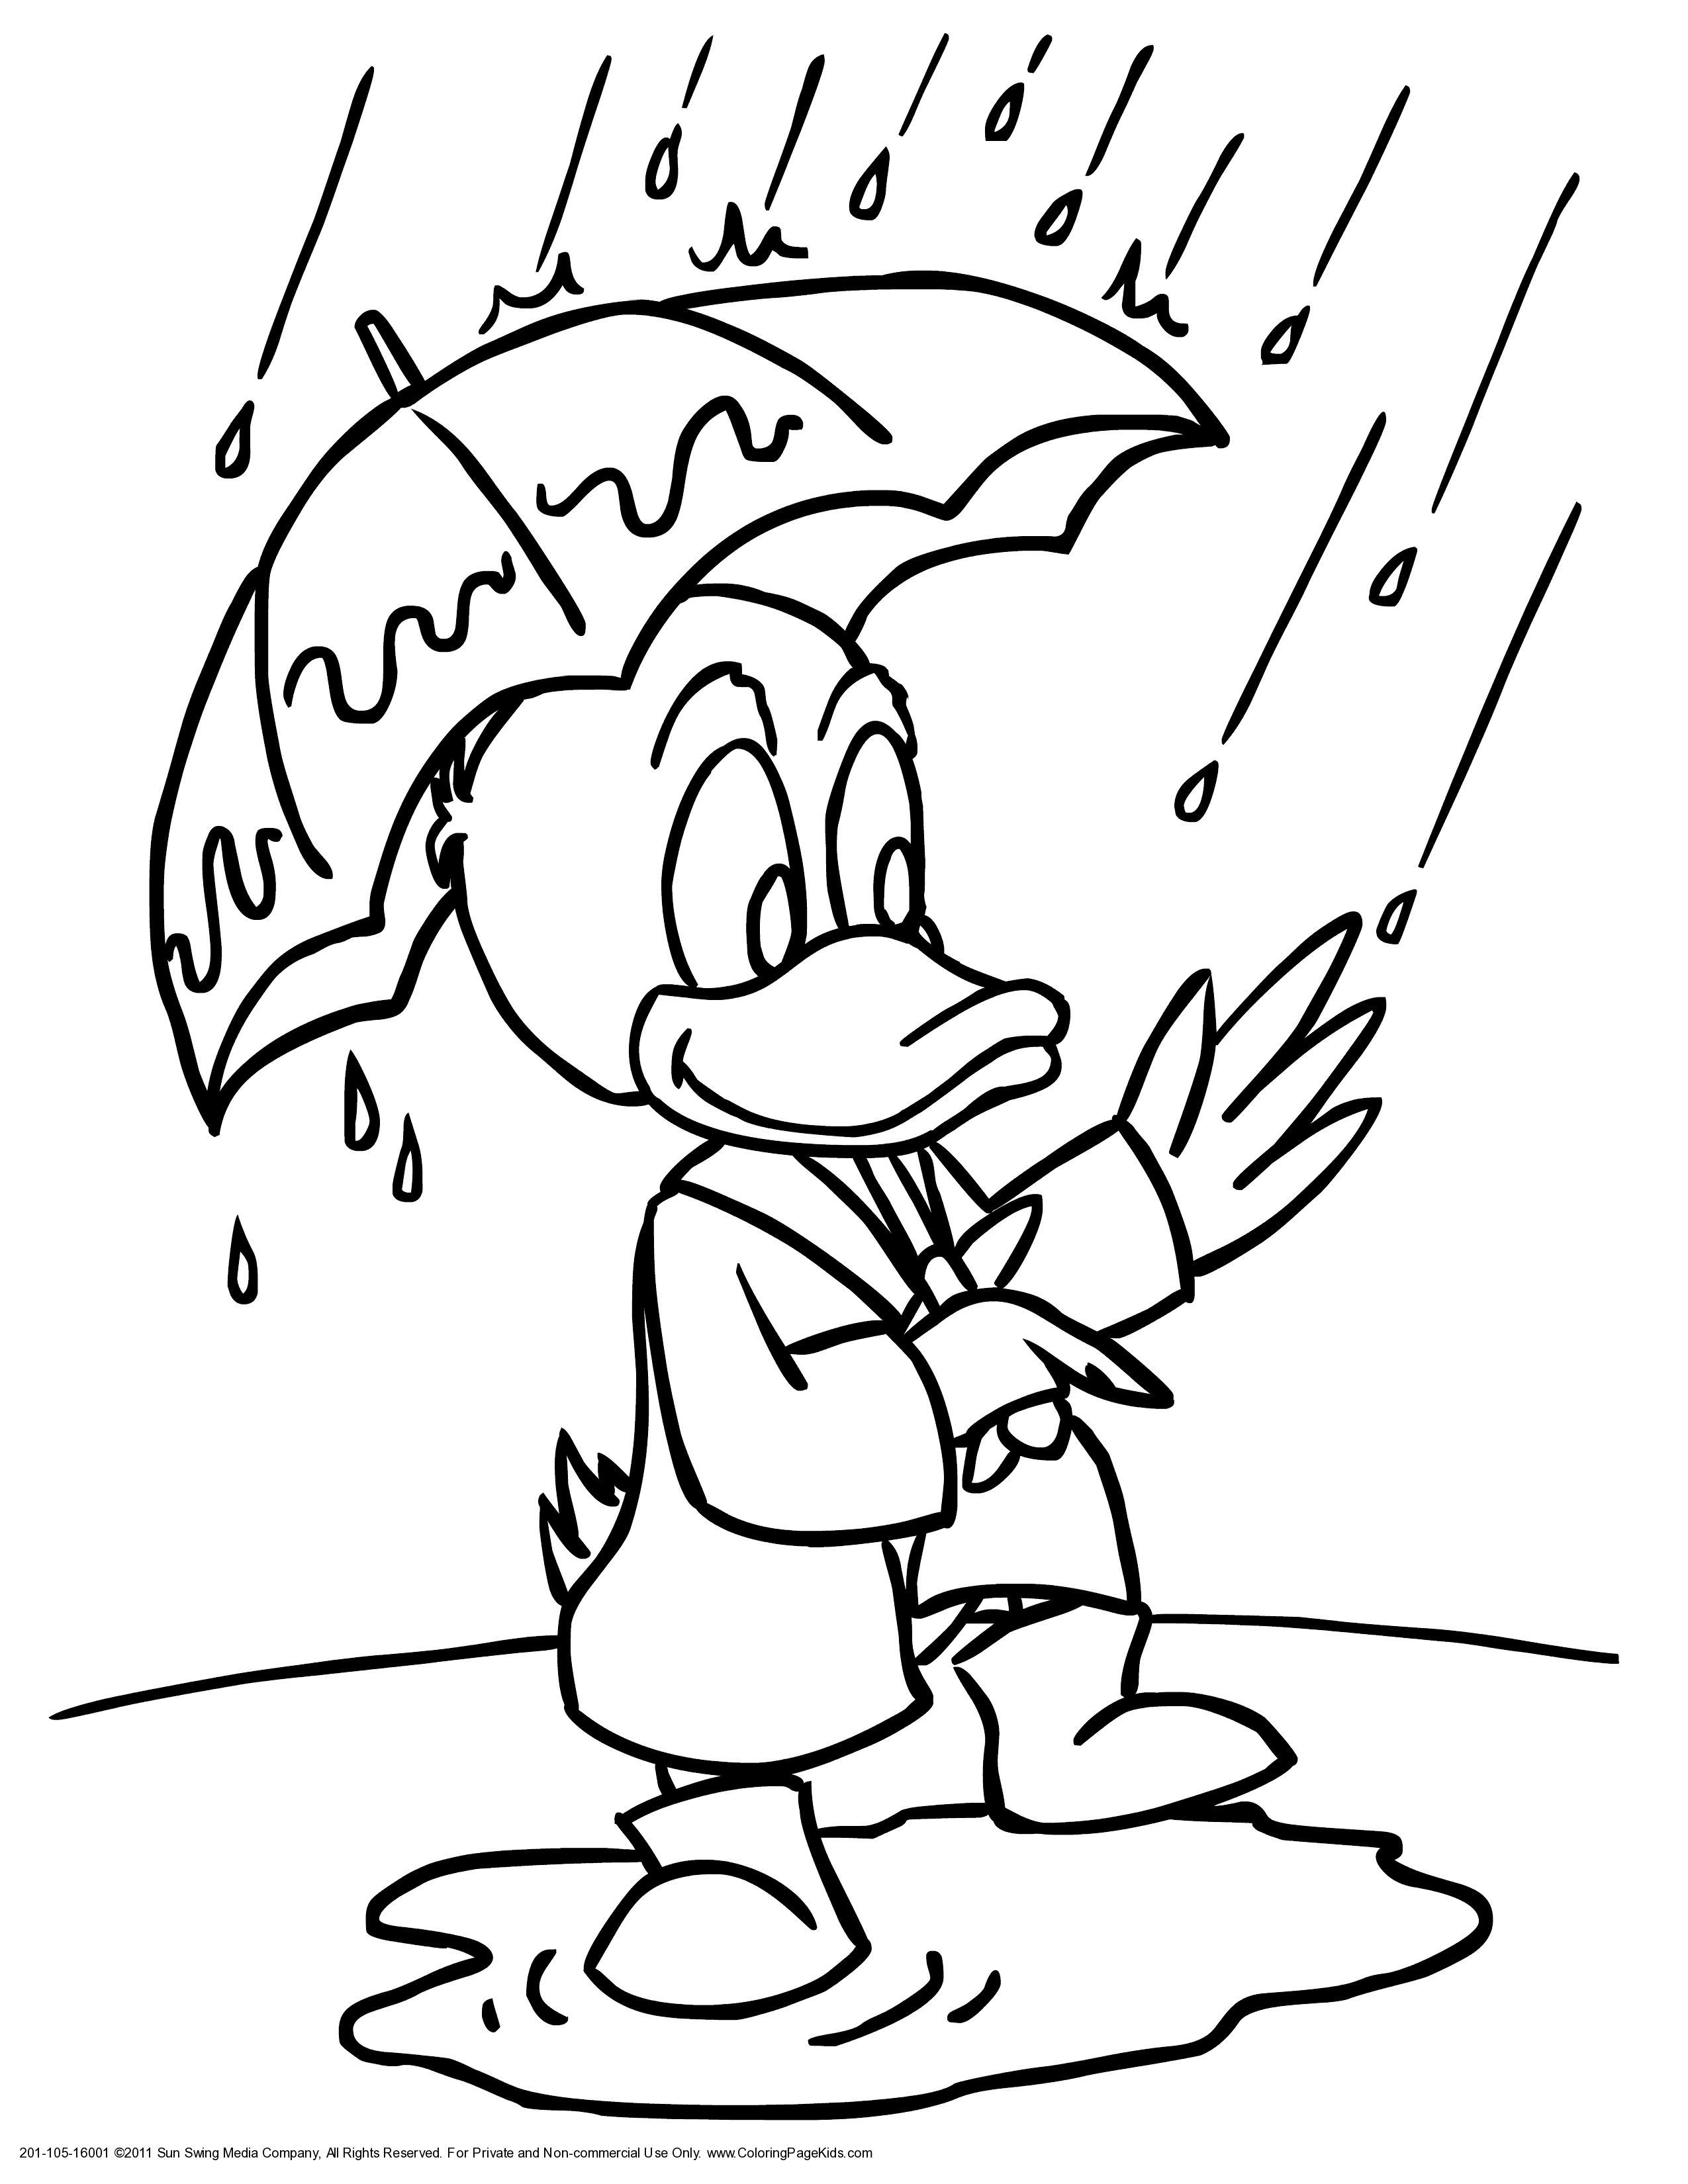 Raining Day - Coloring Pages for Kids and for Adults